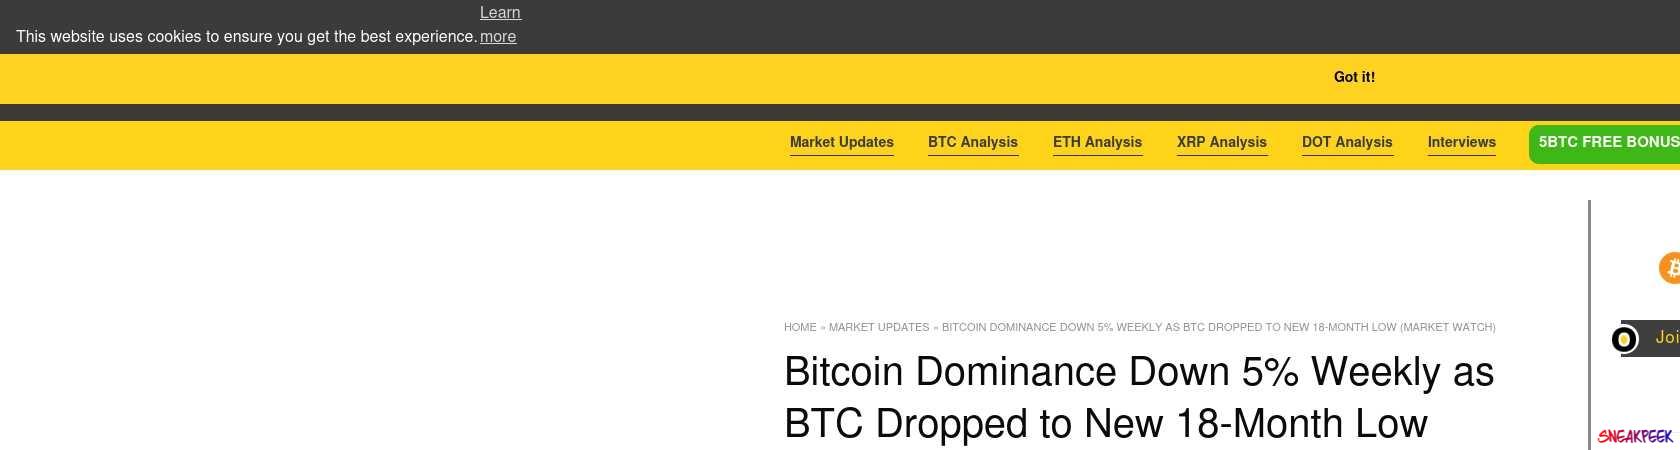 Read the full Article:  ⭲ Bitcoin Dominance Down 5% Weekly as BTC Dropped to New 18-Month Low (Market Watch)